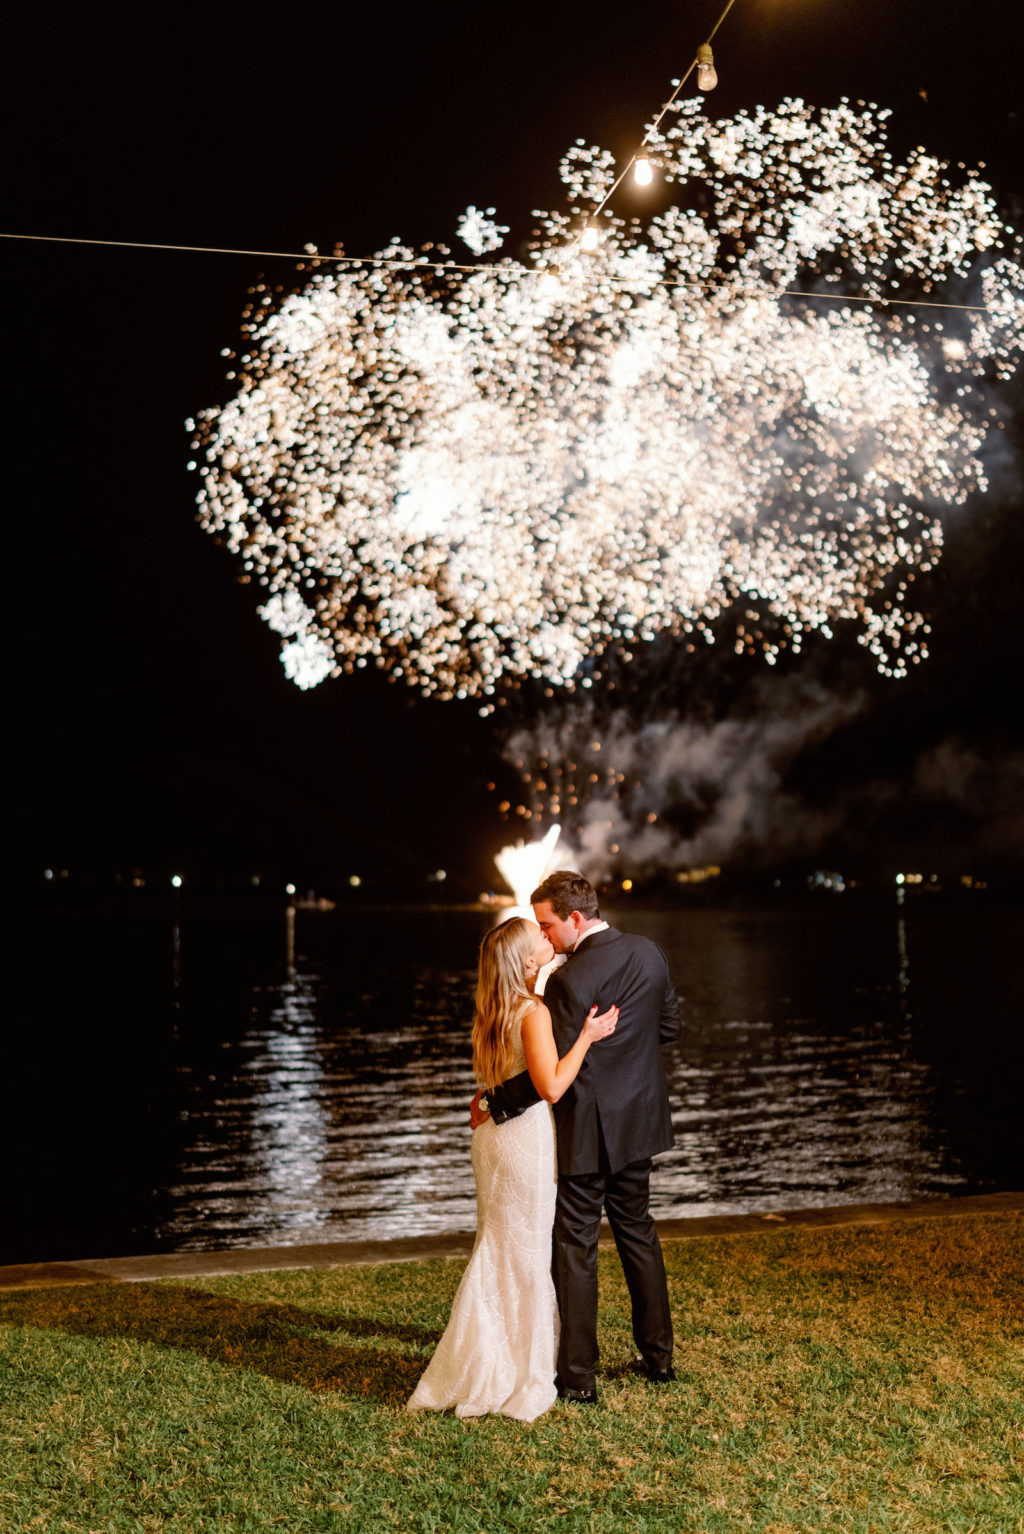 Elegant Luxurious Bride and Groom Waterfront Fireworks Photo | Tampa Bay Nk Productions Wedding Planning